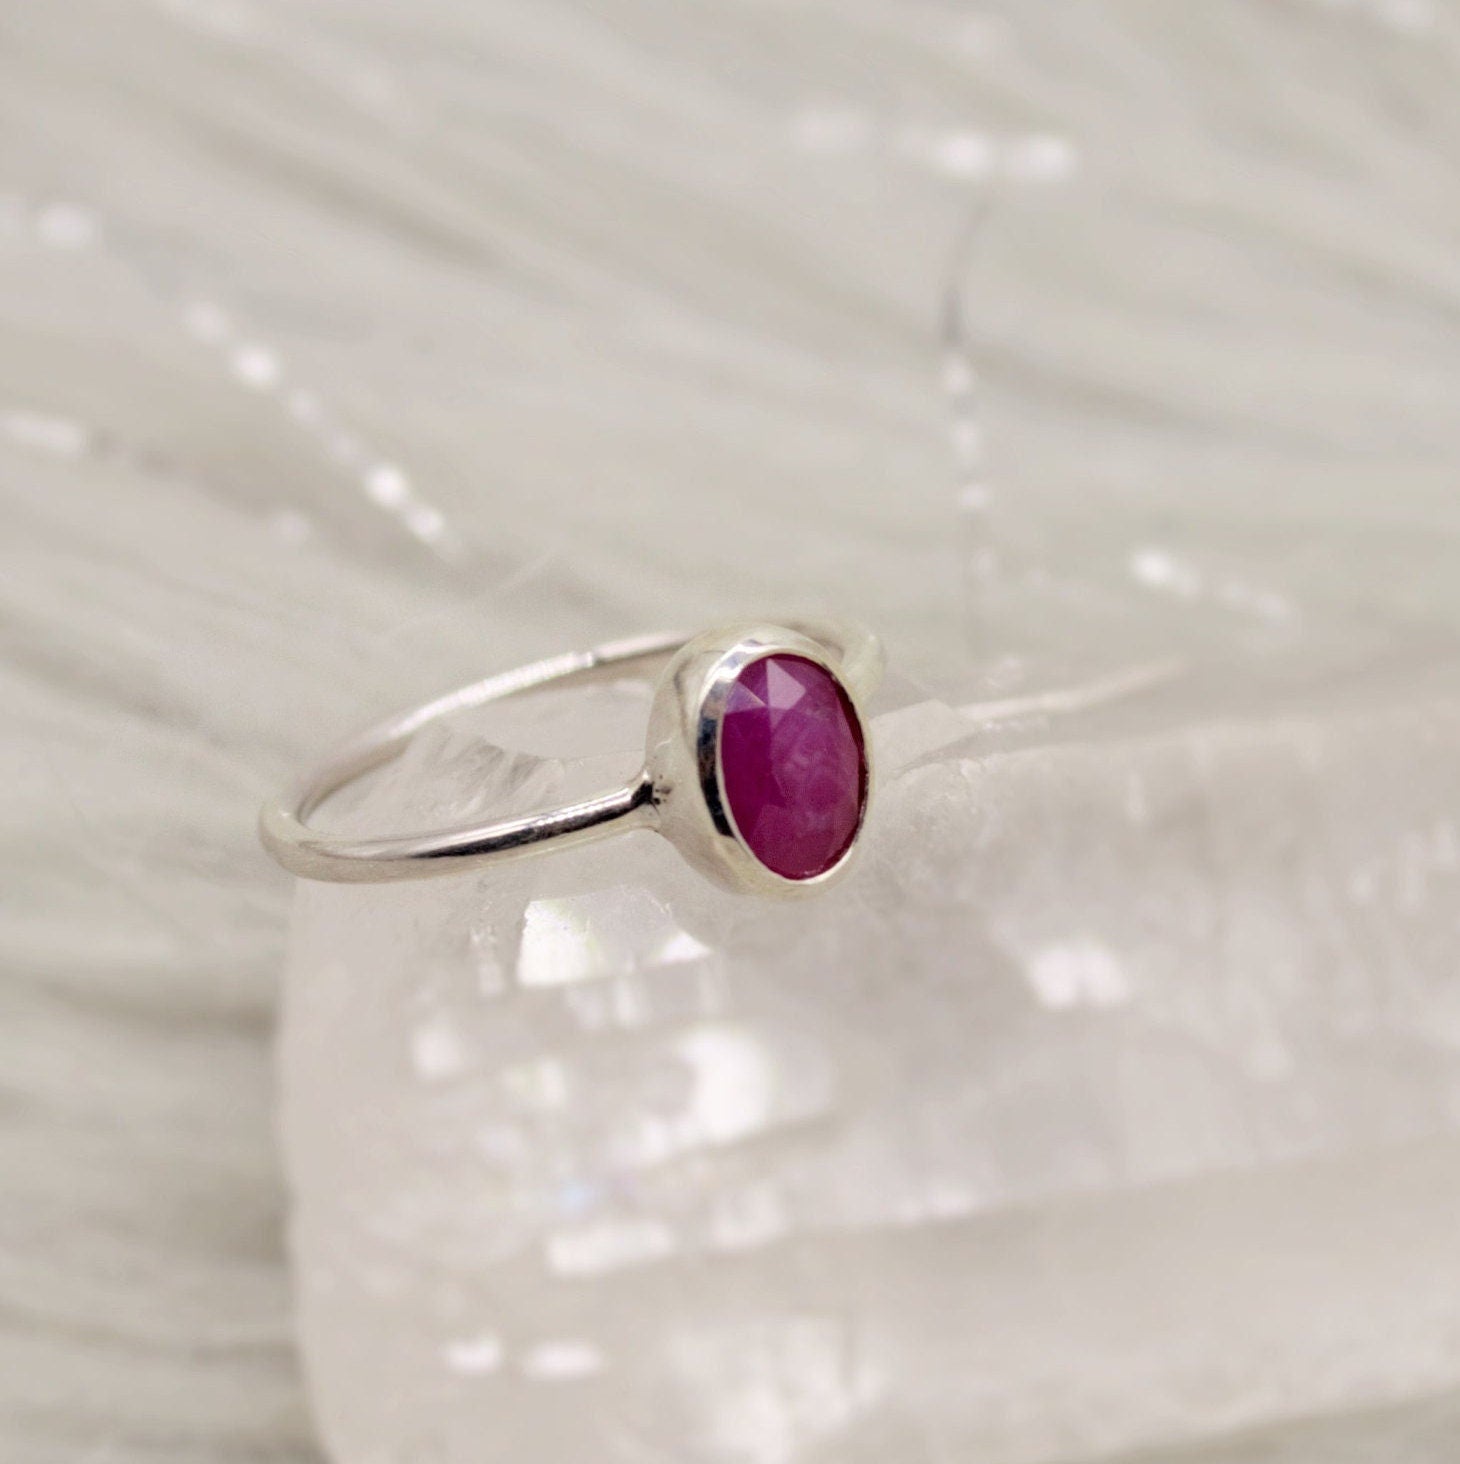 Red Ruby Ring, 925 Sterling Silver Ring, July Birthstone, Ruby Jewelry, Handmade Dainty Gemstone Ring, Birthday Gifts, Gift For Her